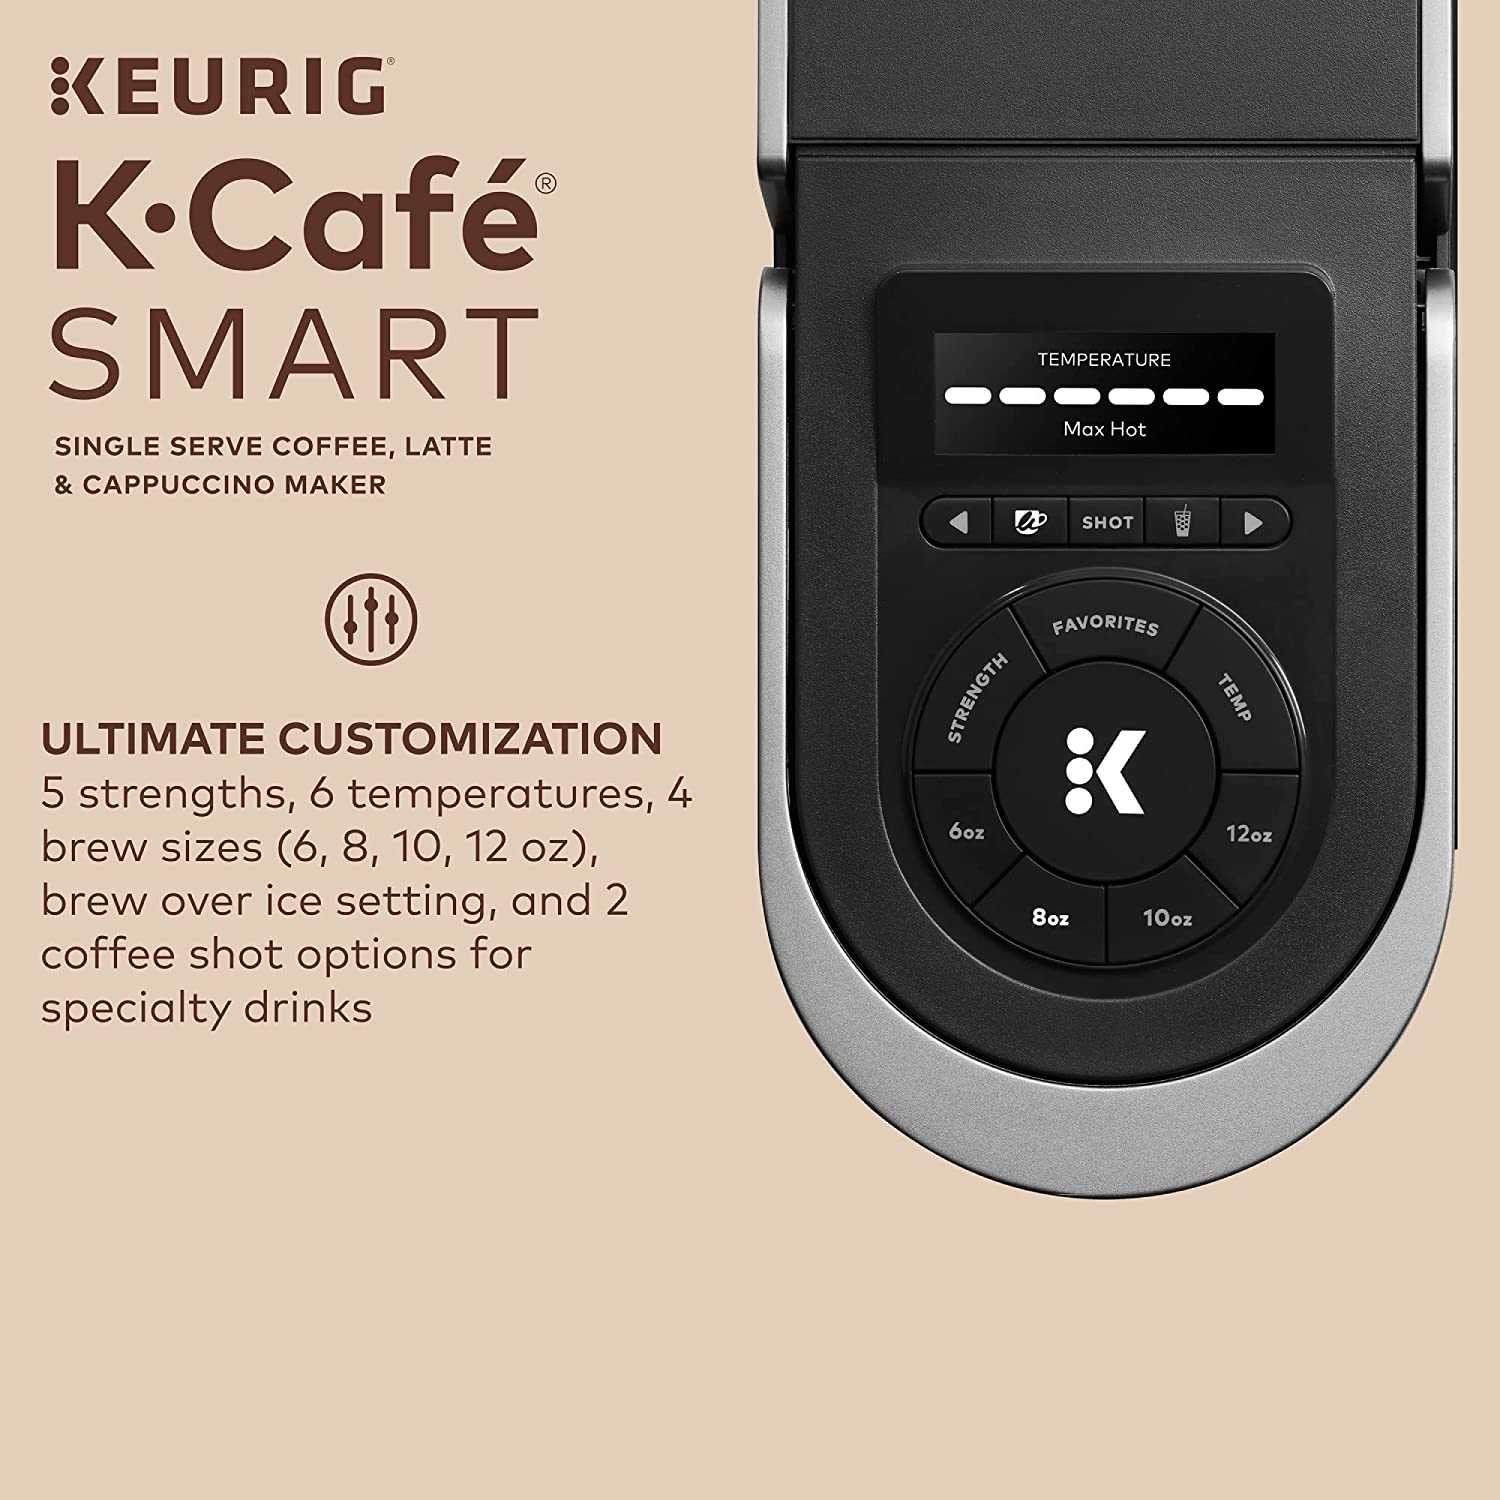 https://discounttoday.net/wp-content/uploads/2022/11/Keurig-K-Cafe-SMART-Single-Serve-Coffee-Maker-with-WiFi-Compatibility-8.jpg